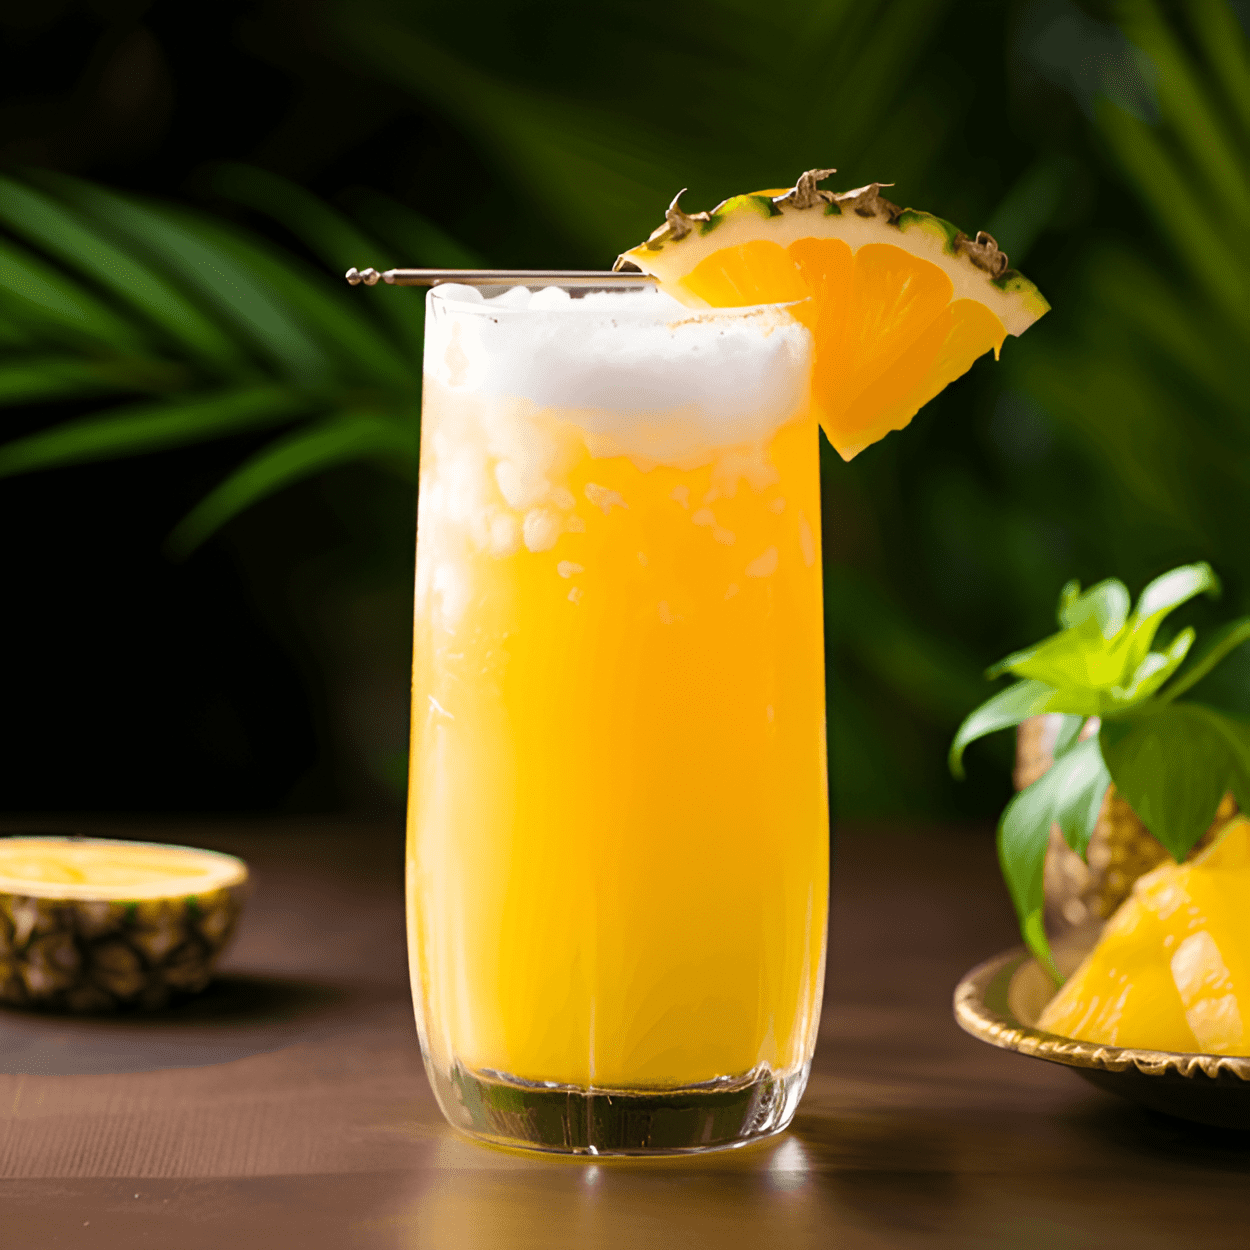 El Dorado Cocktail Recipe - El Dorado is a sweet and fruity cocktail, with a strong rum base. It has a tropical taste, with hints of pineapple and coconut. The lime juice adds a sour note, balancing the sweetness of the other ingredients. It's a strong drink, but the fruitiness makes it quite palatable.